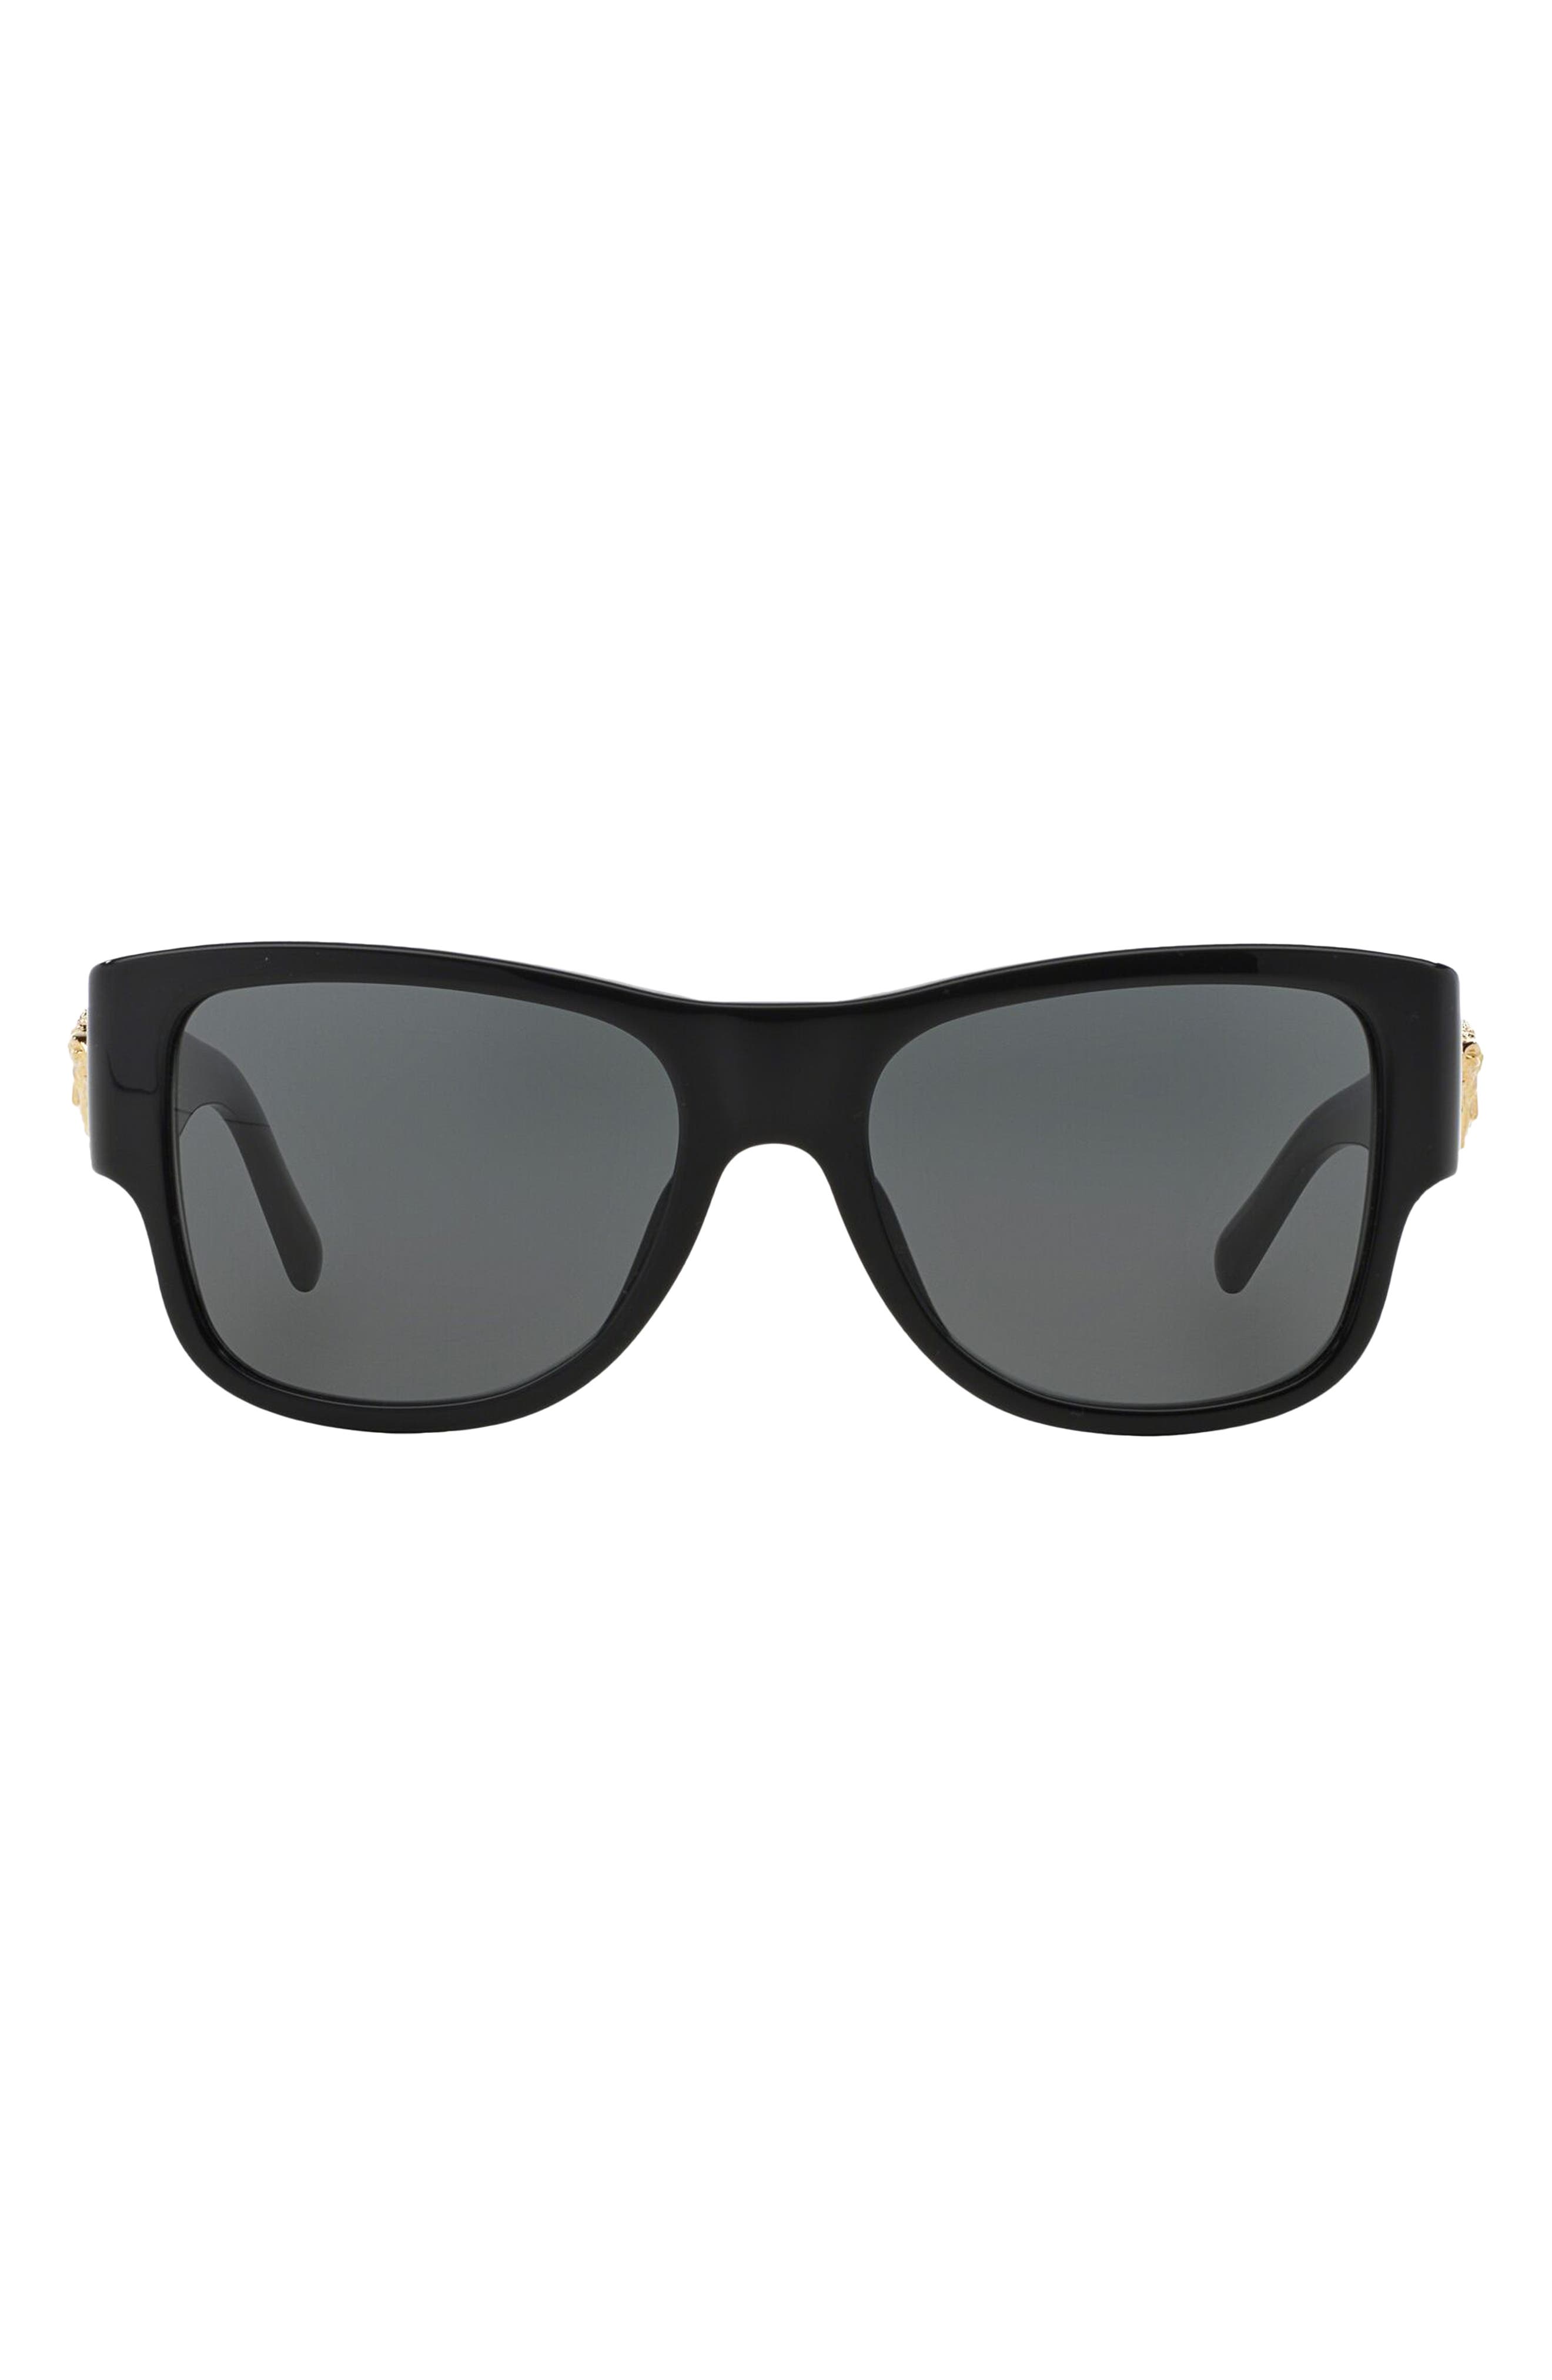 Versace 58mm Square Sunglasses in Black/Grey Solid at Nordstrom